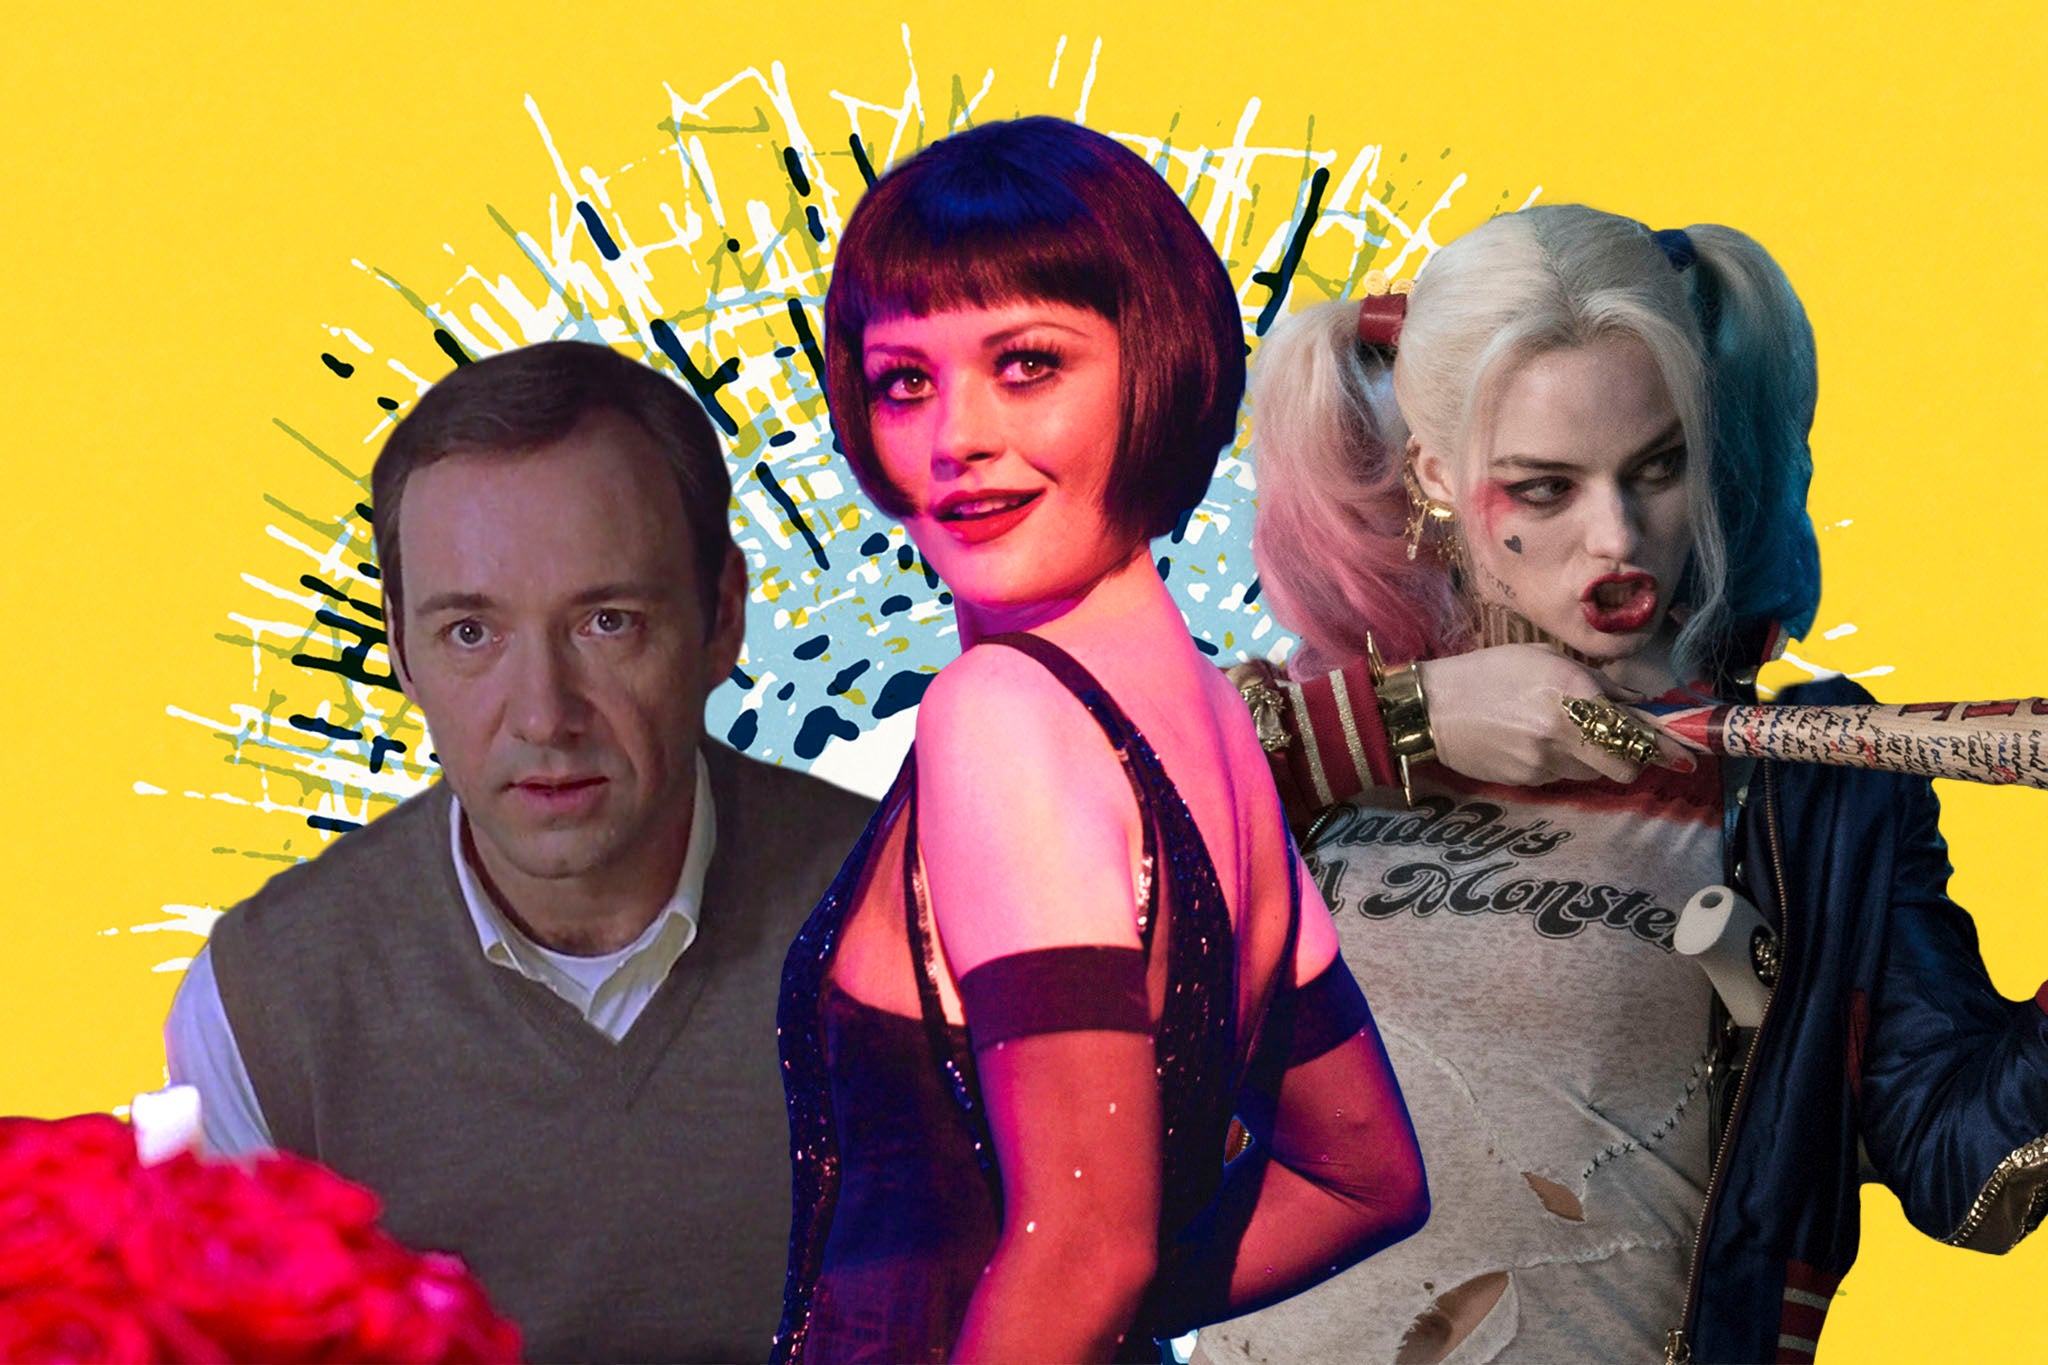 Most hated: ‘American Beauty’, ‘Chicago’ and ‘Suicide Squad’ all won controversial Oscars